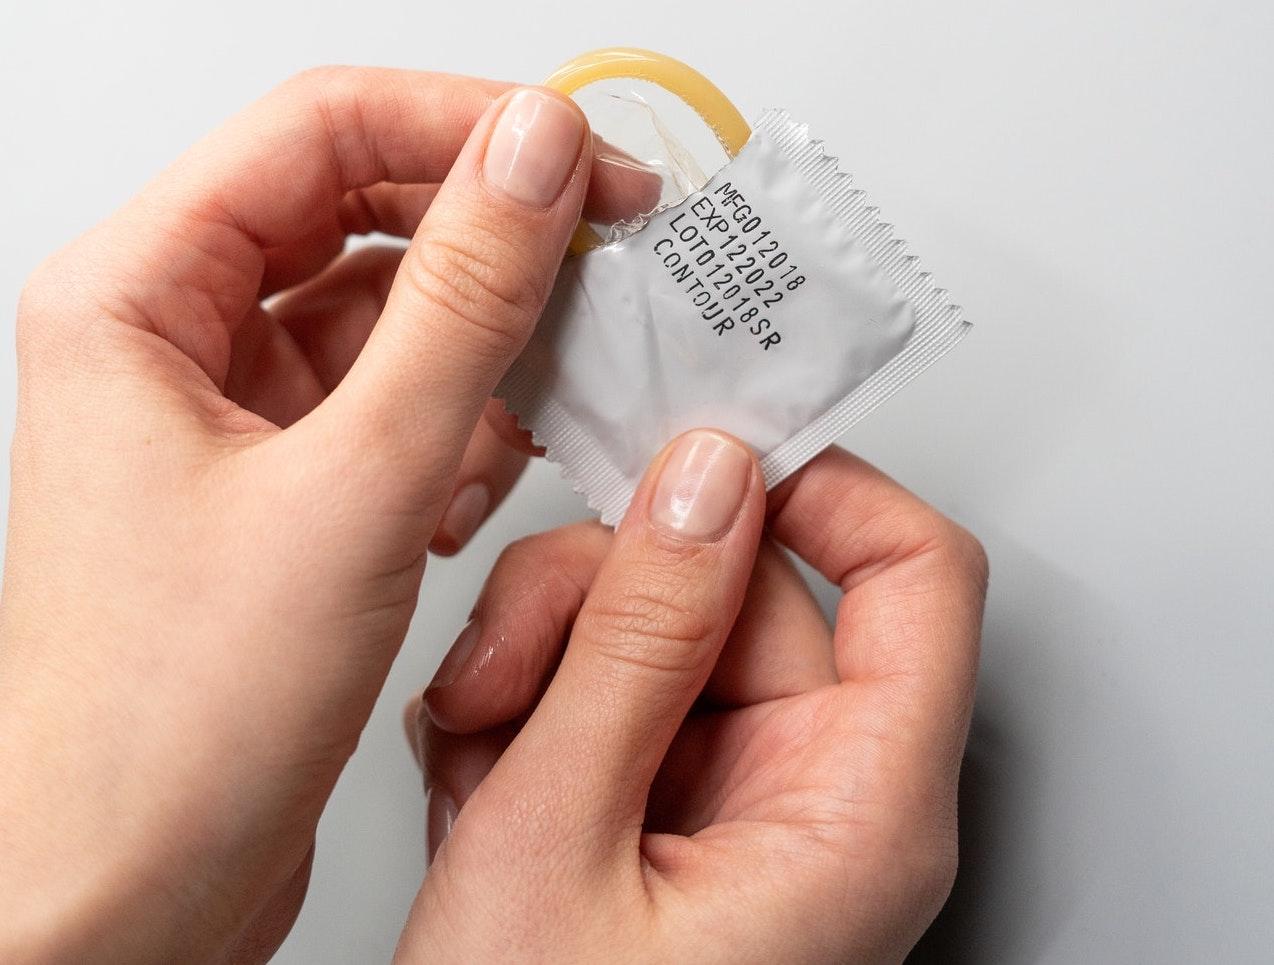 Medical authorities have warned about the dangers of washing and reusing condoms. Photo: Pexels